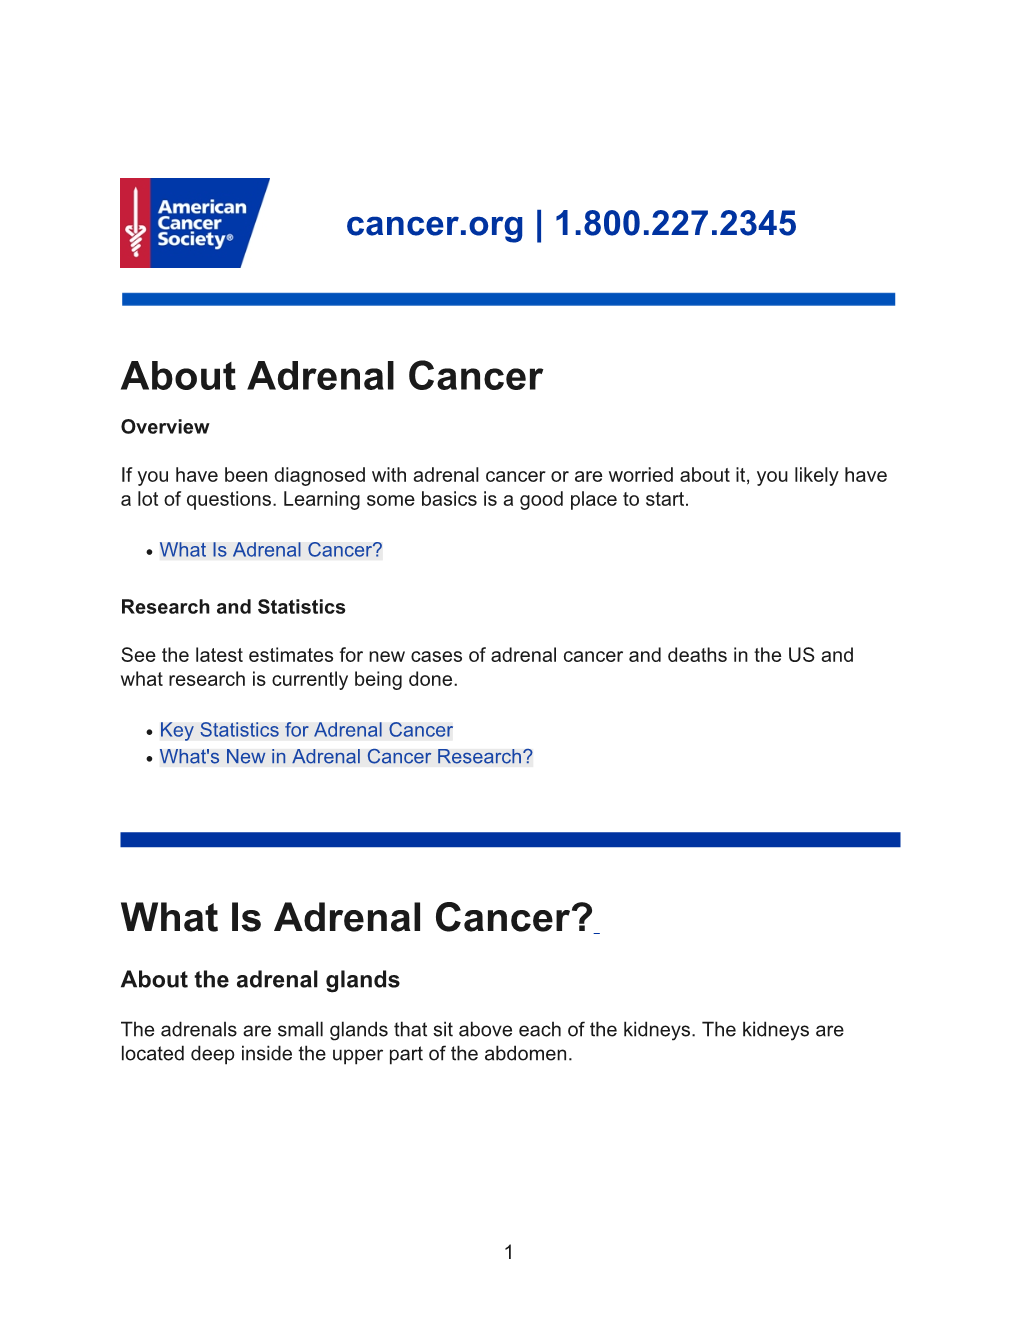 What Is Adrenal Cancer?